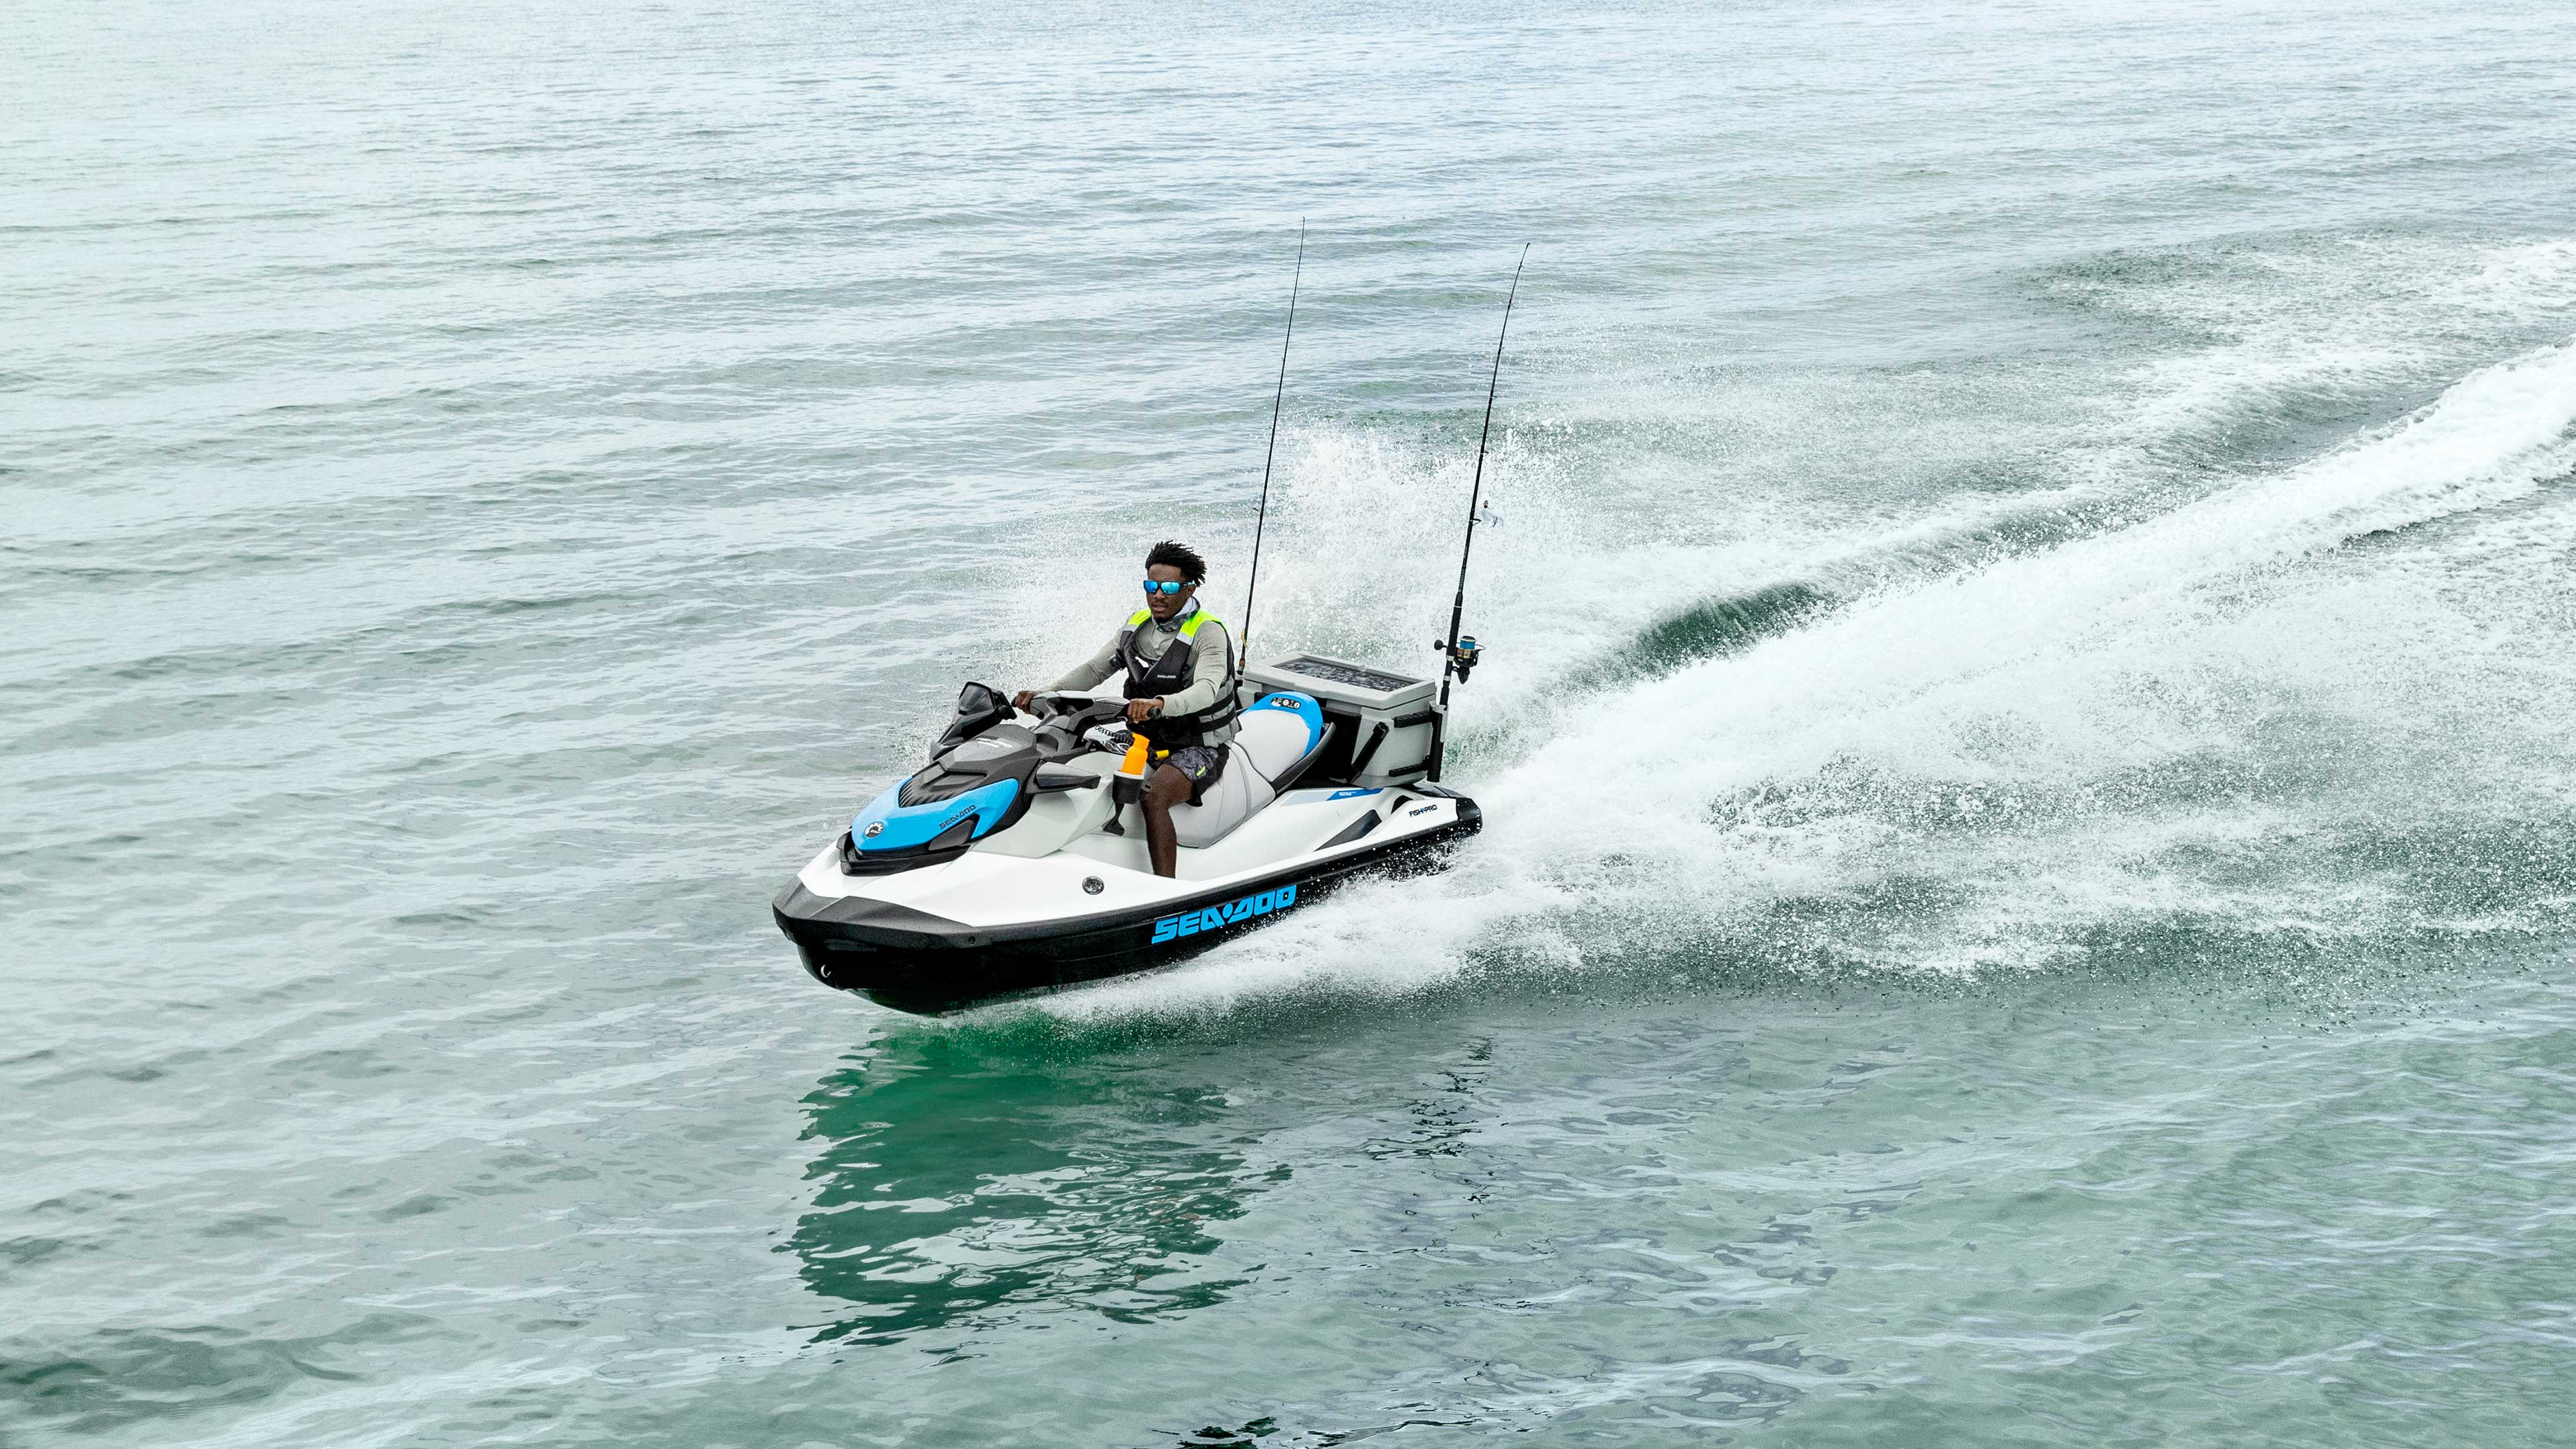 Have you seen the new SeaDoo "Fish Pro?"